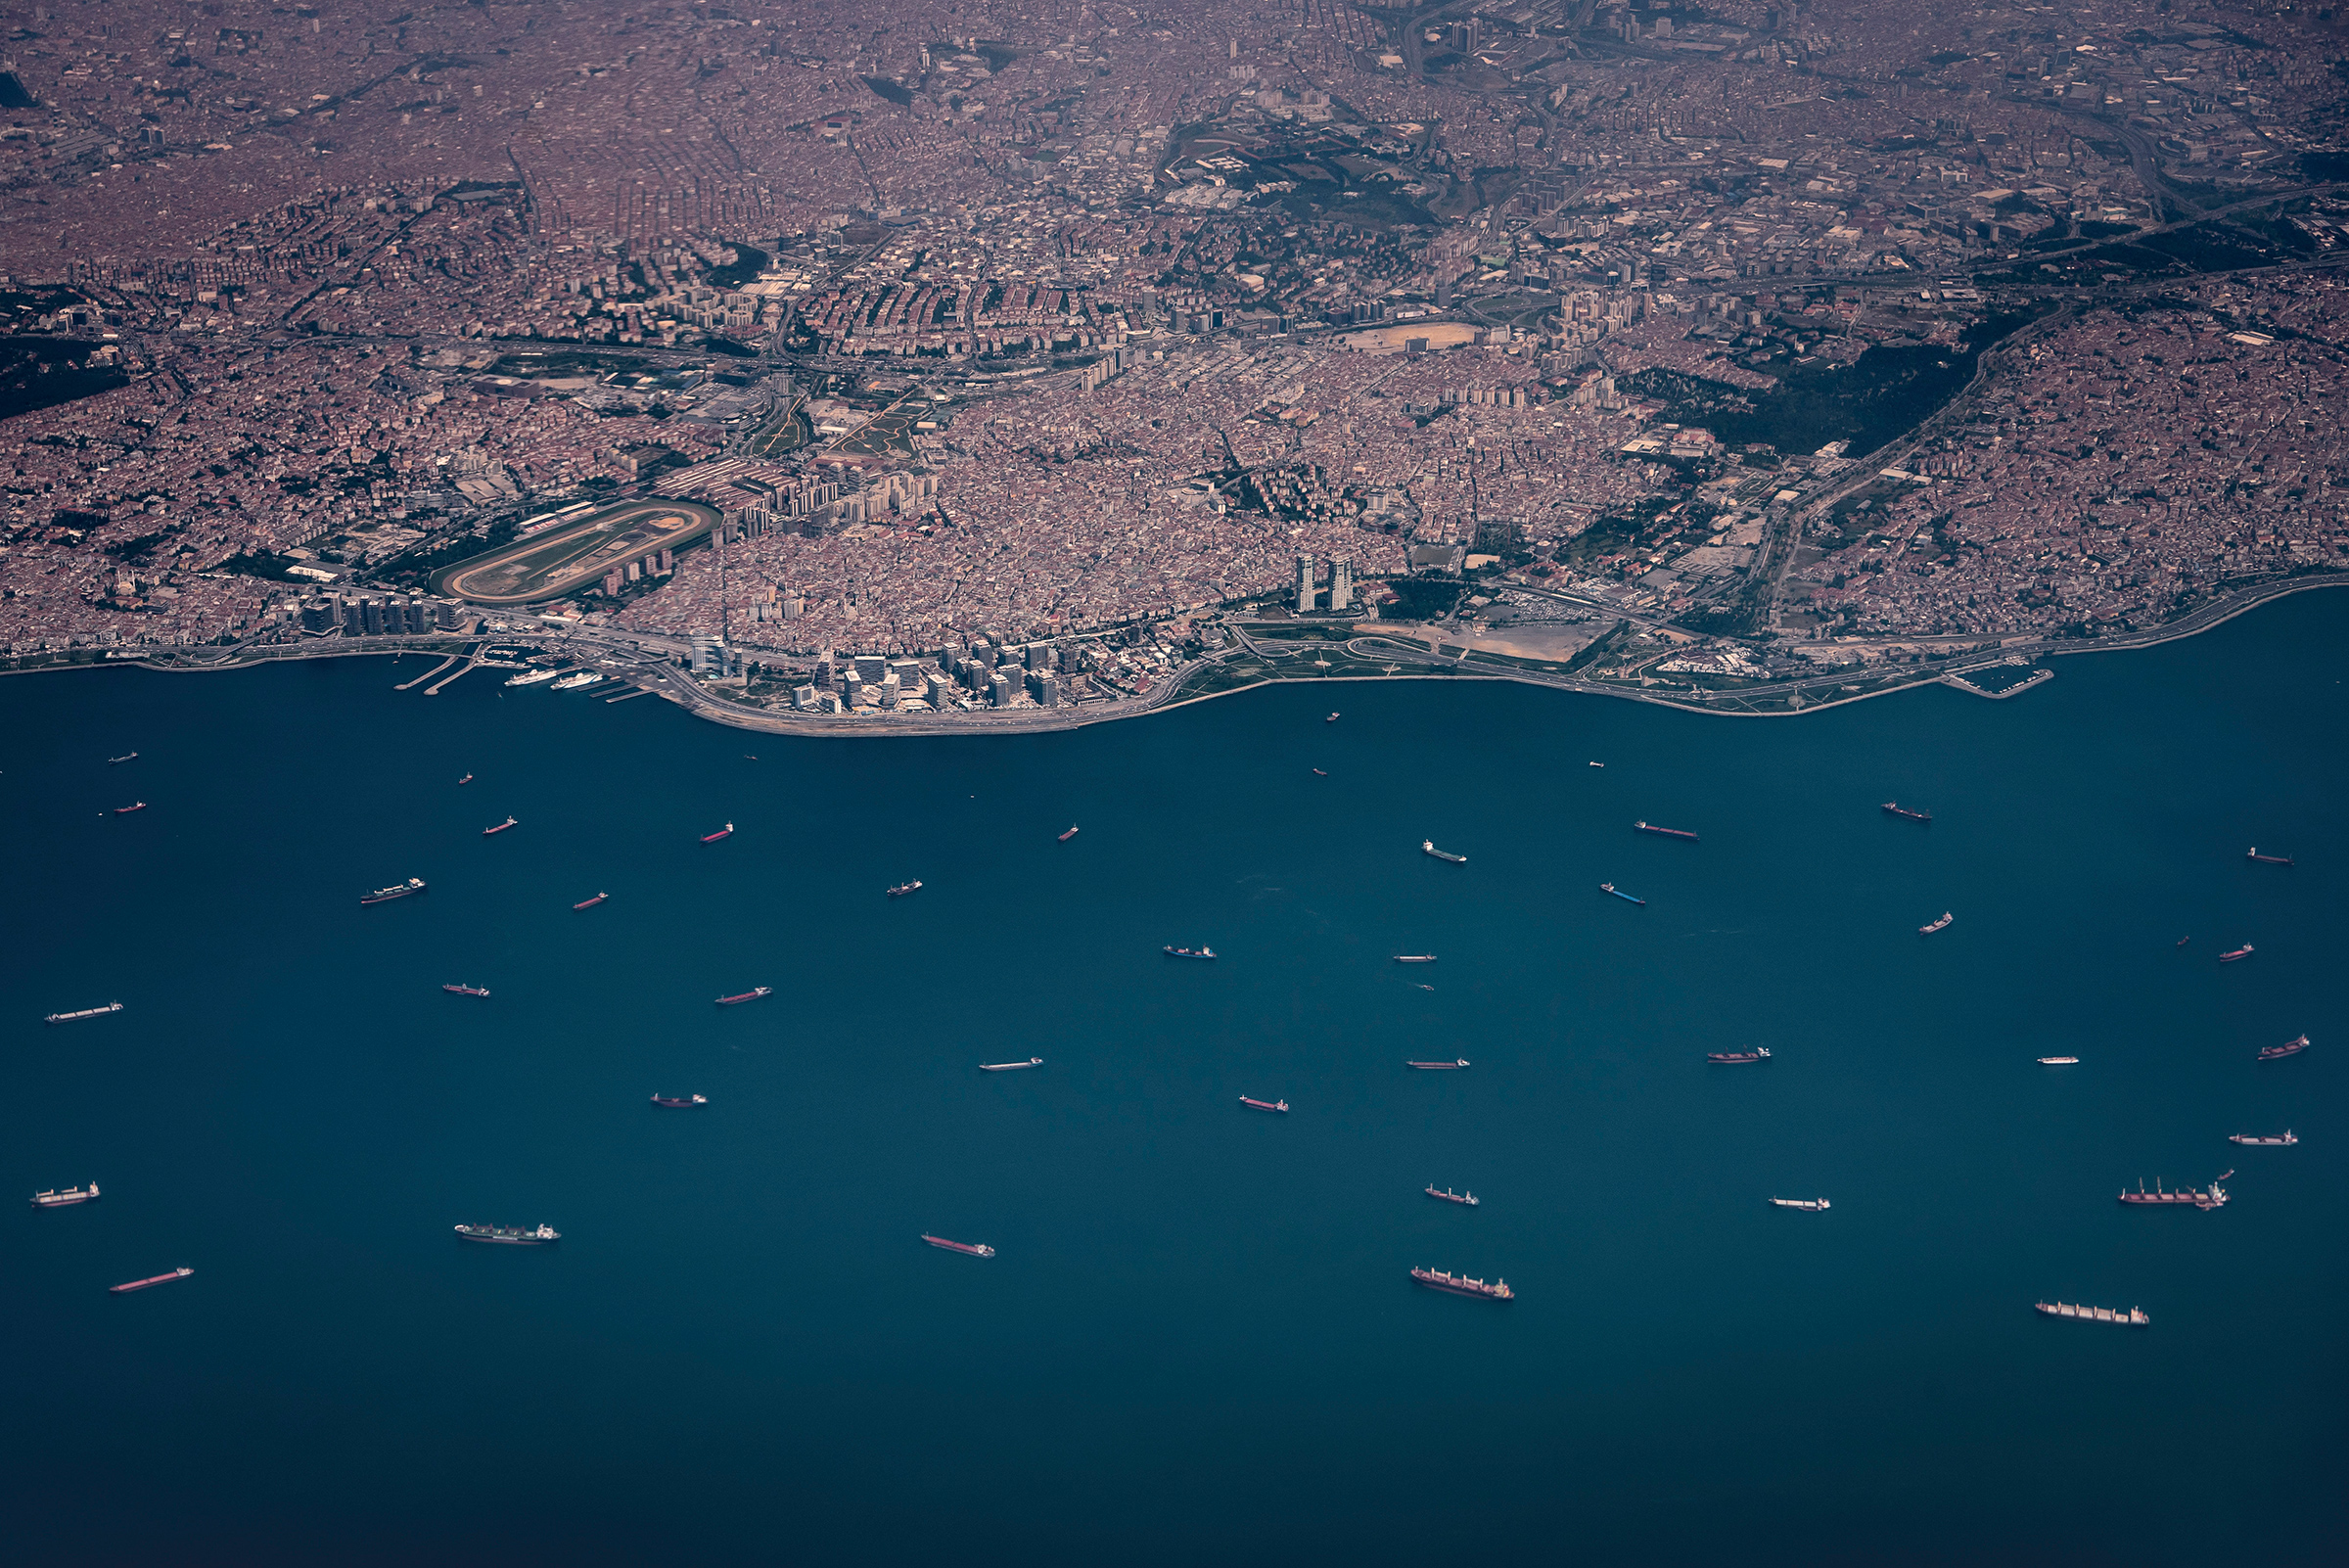 Cargo ships wait for their turn to enter the Bosporus Strait outside Istanbul in June 2018.